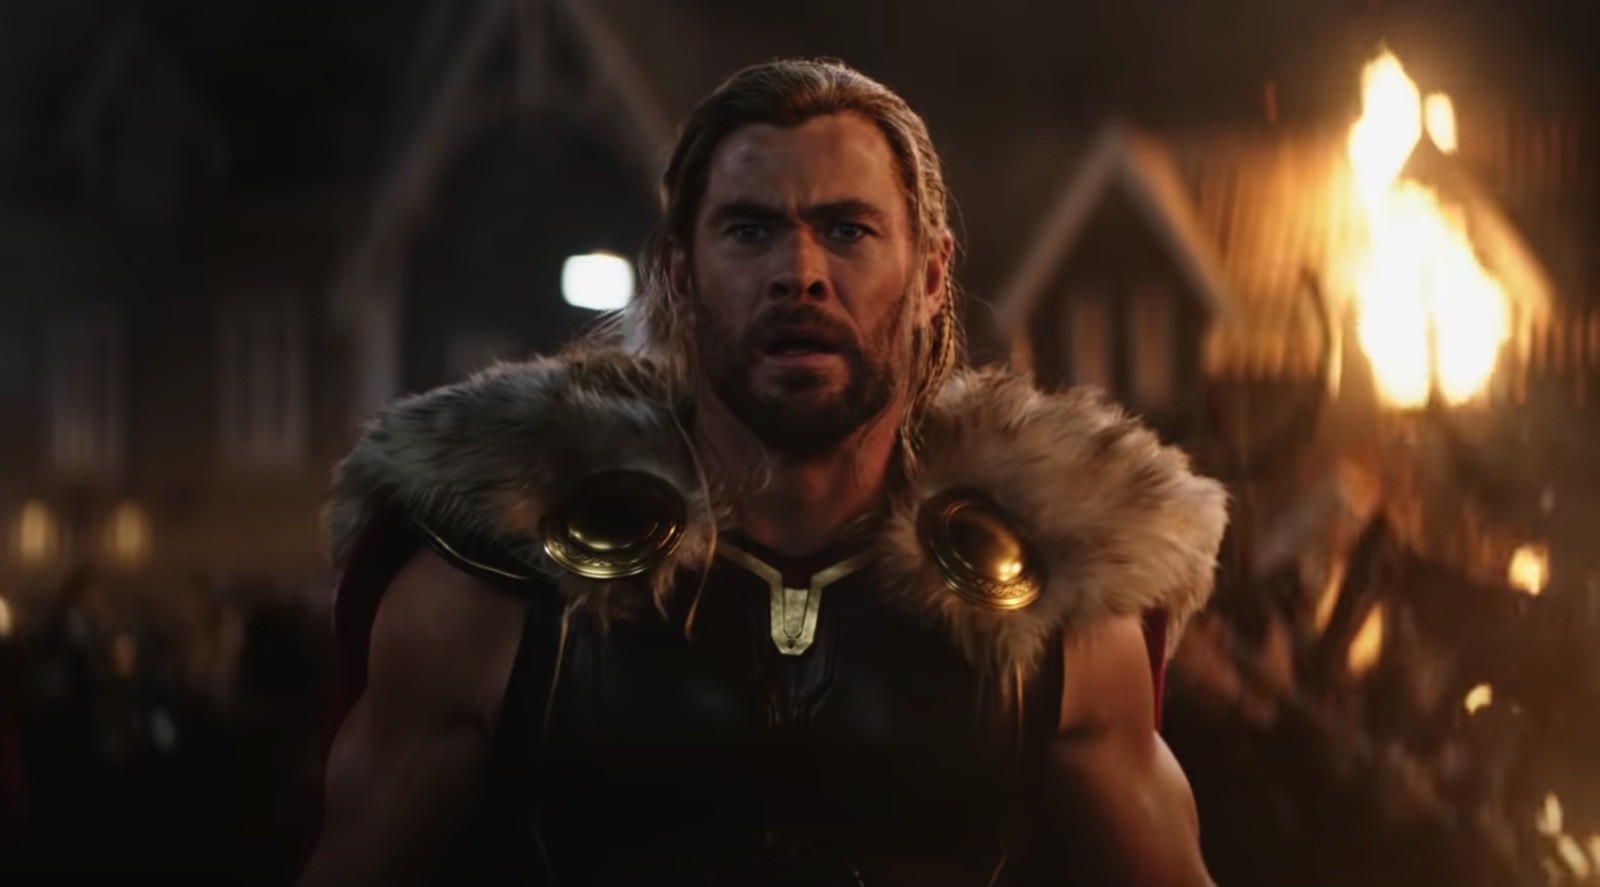 Thor (Chris Hemsworth) shocked to see Mighty Thor (Natalie Portman) in Love and Thunder trailer.